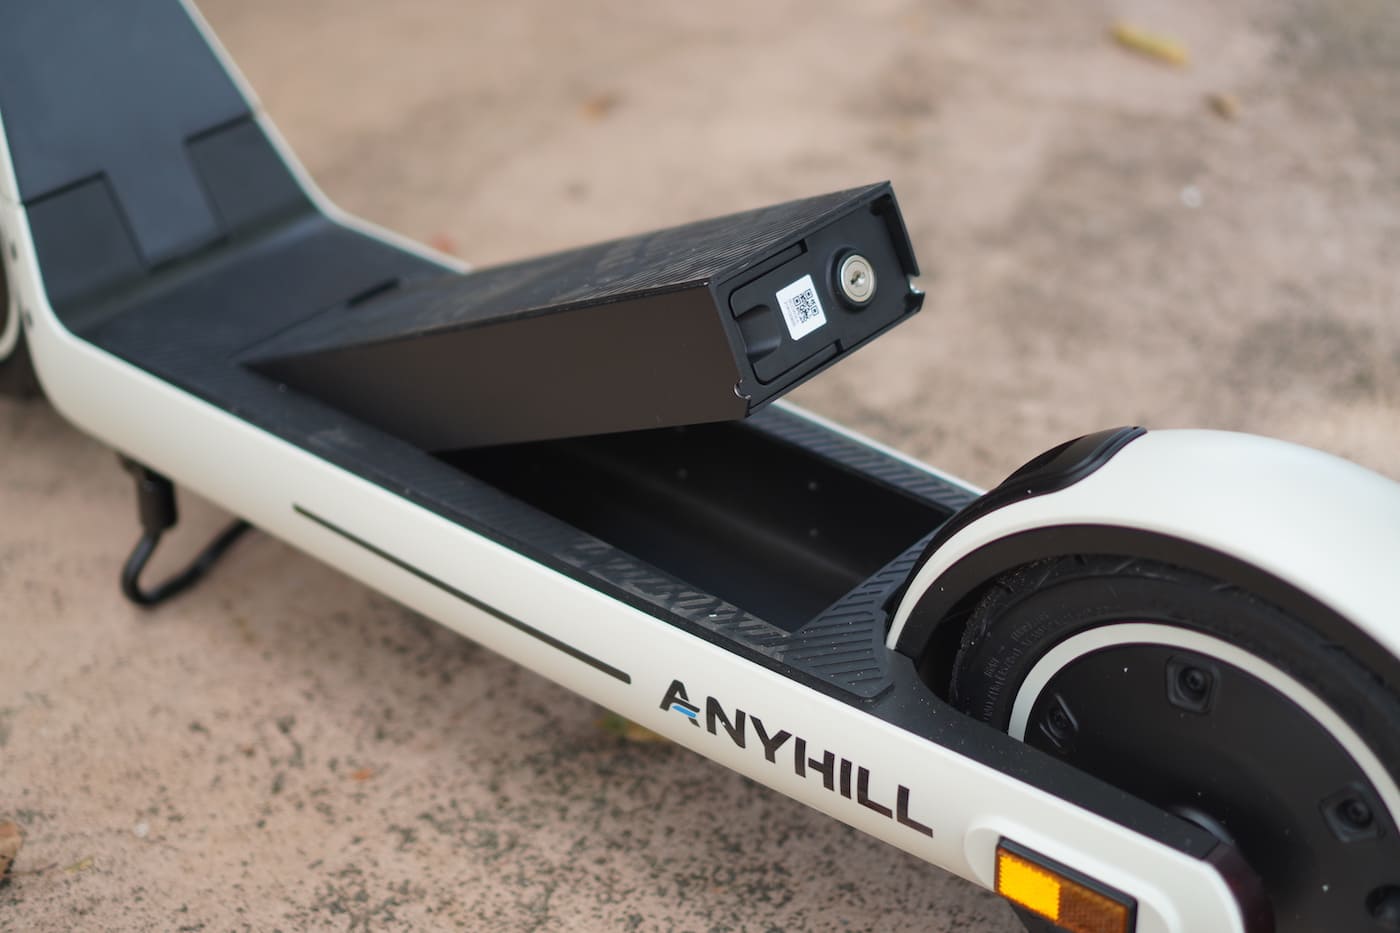 anyhill-um2-electric-scooter-review-10.jpg?quality=82&strip=all